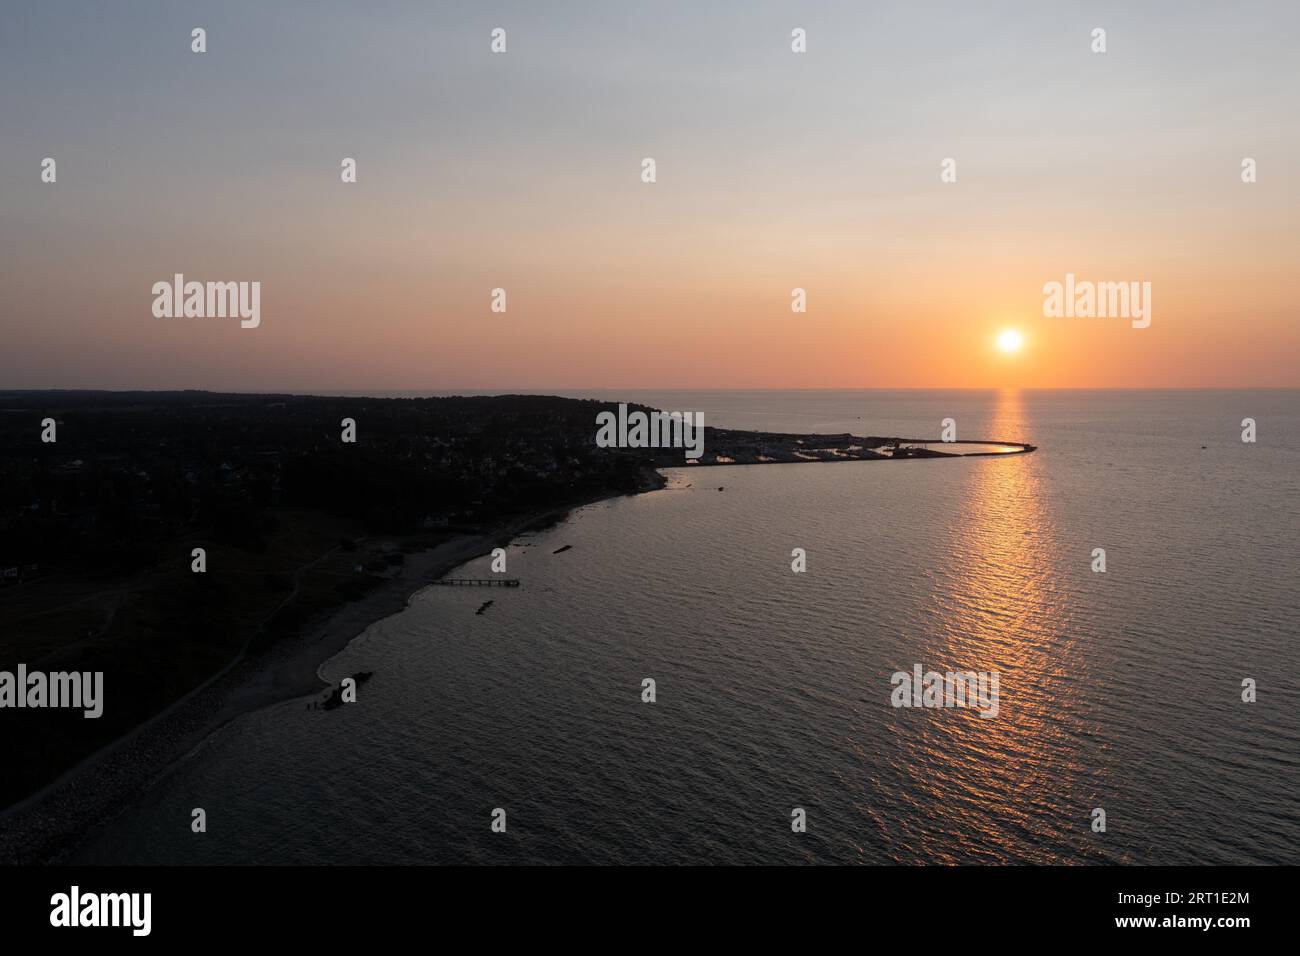 Gilleleje, Denmark, July 23, 2021: Aerial drone view of the silhouette of the local fishing harbour Stock Photo